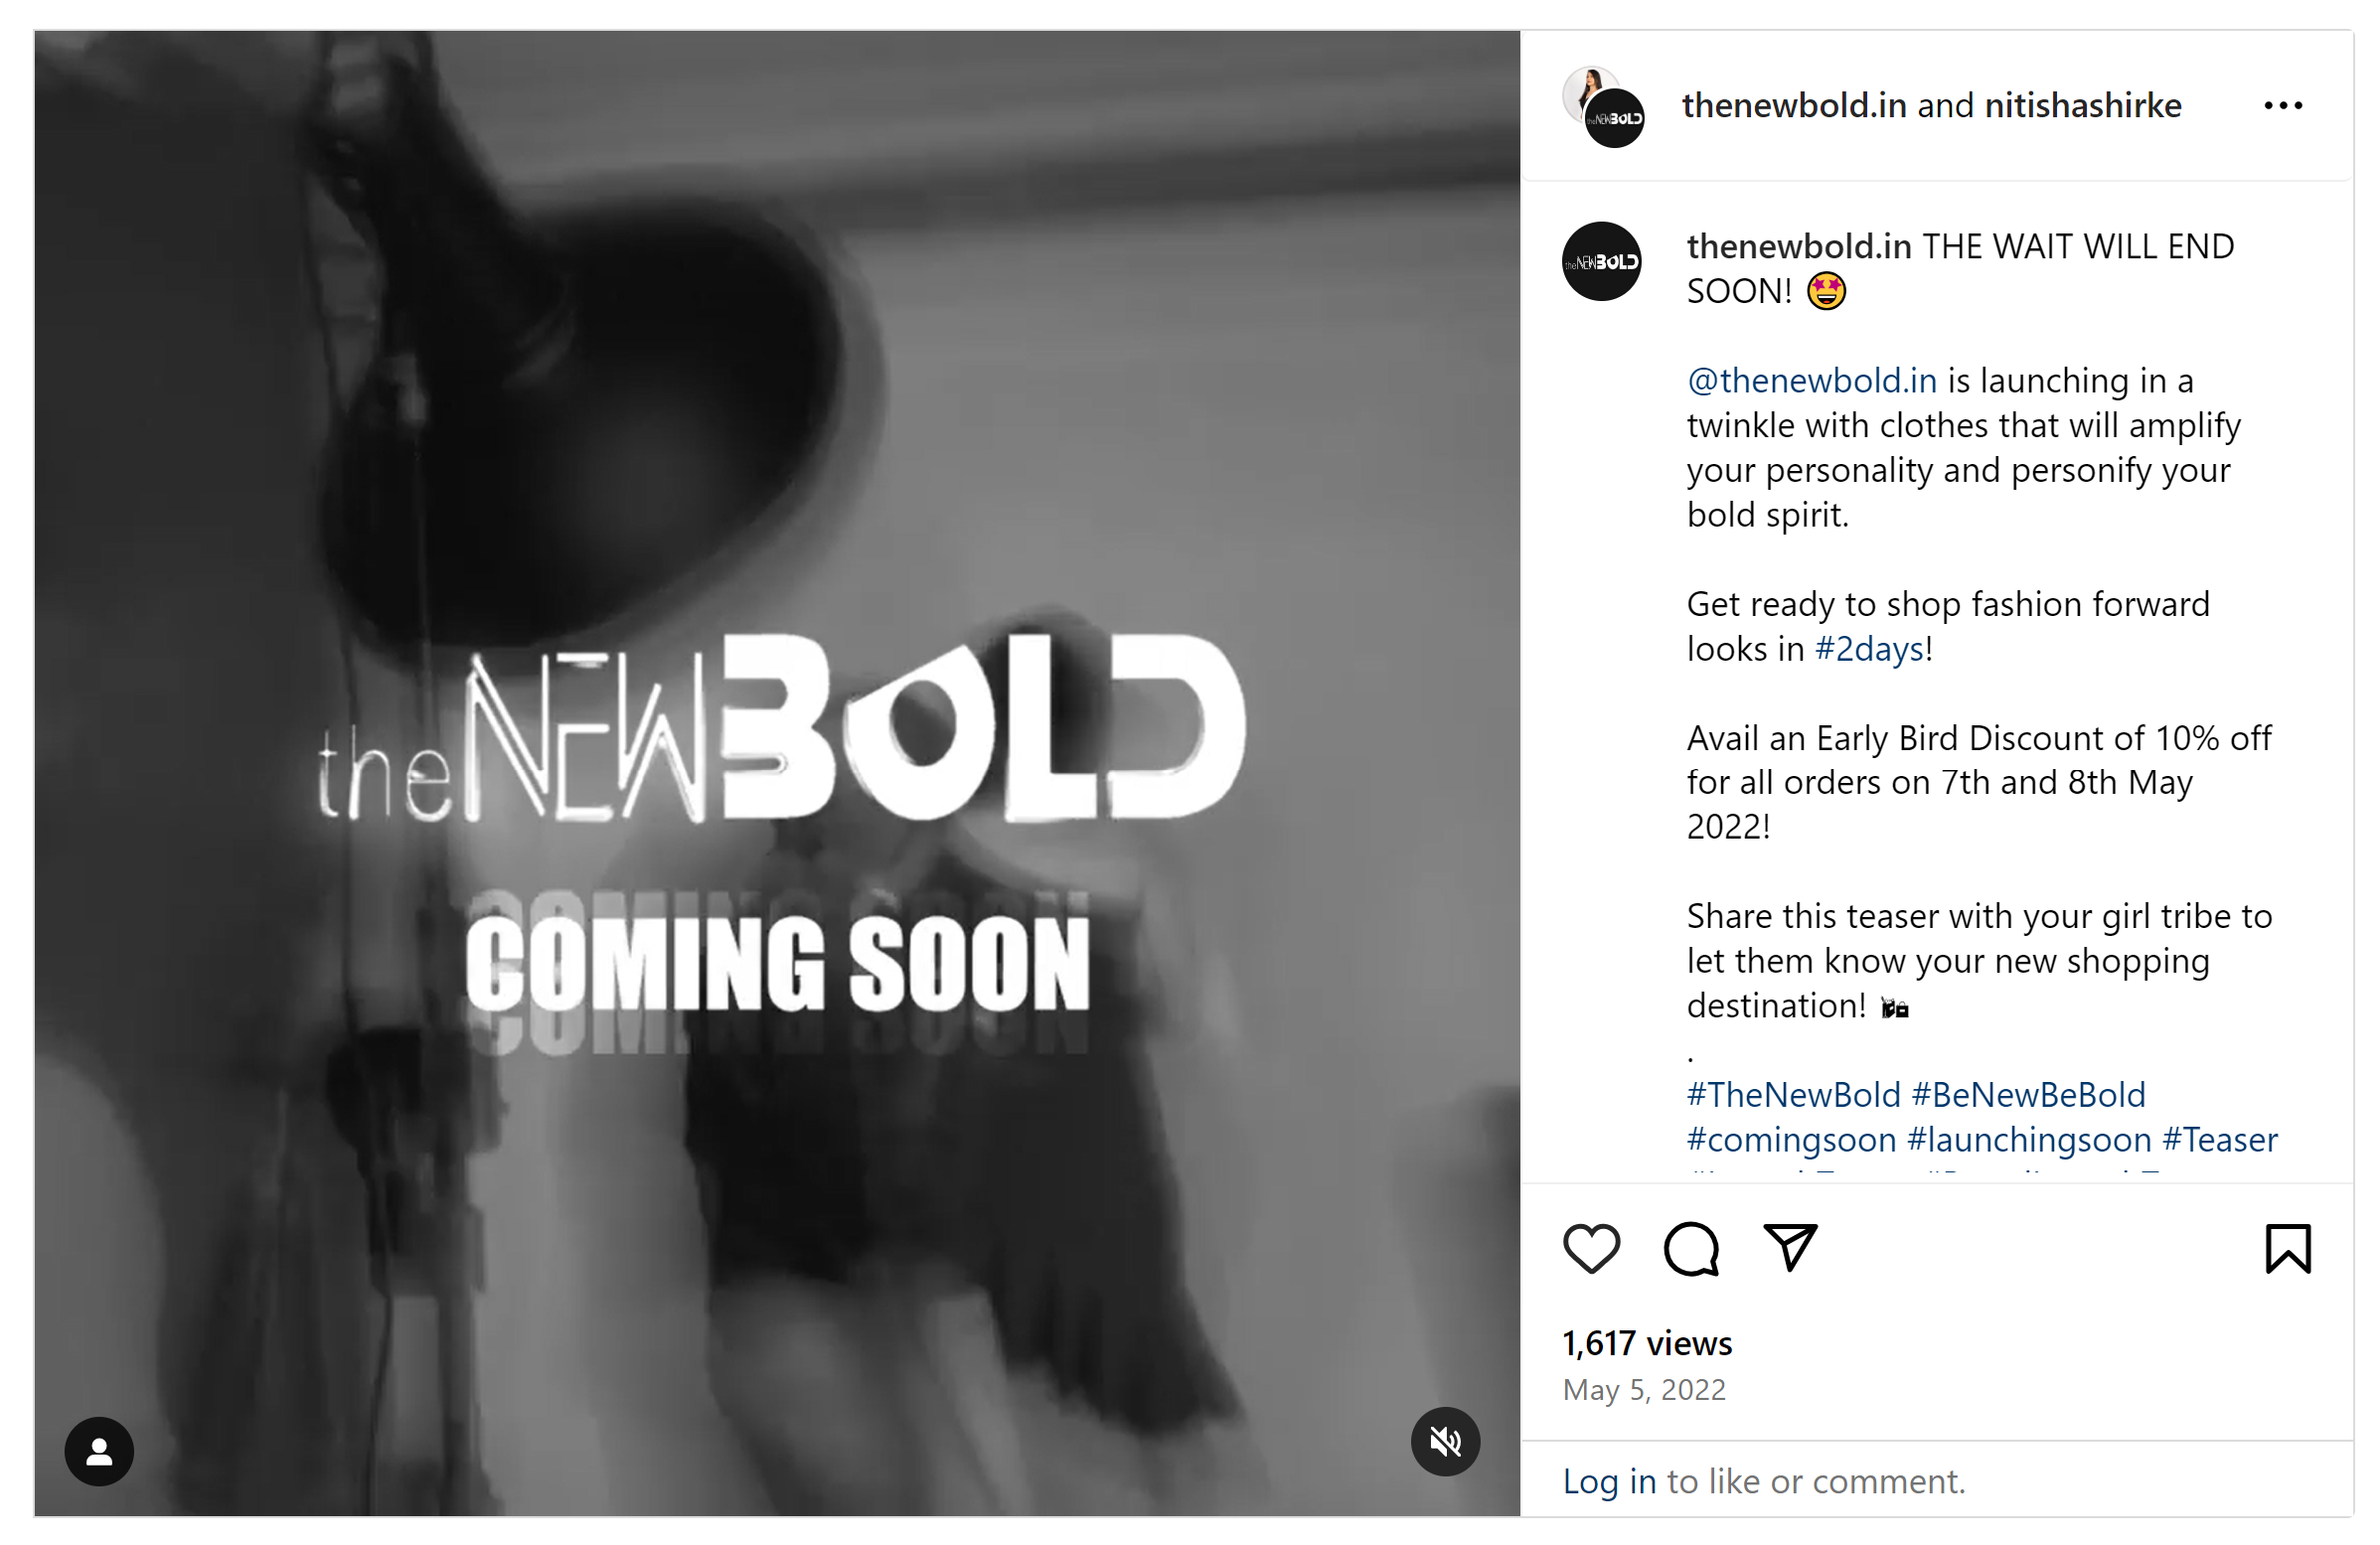 Product launch announcement post on Instagram